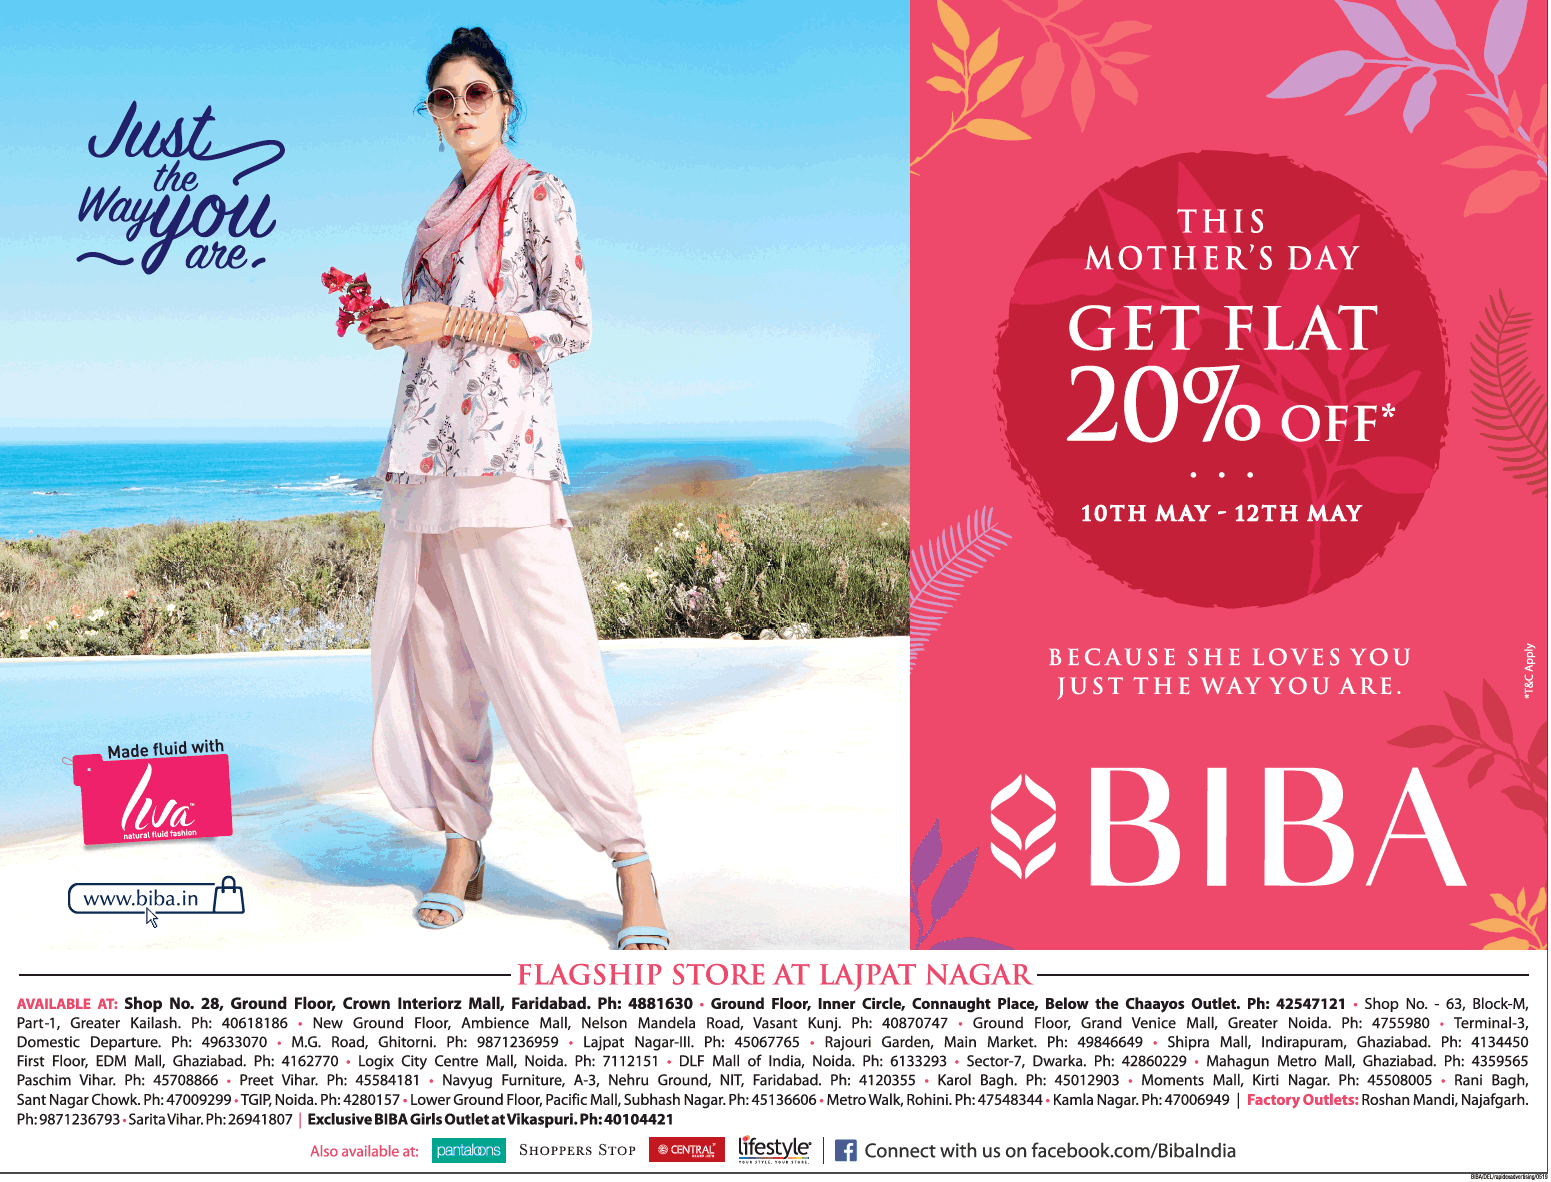 biba-clothing-this-mothers-day-get-flat-20%-off-ad-delhi-times-10-05-2019.png